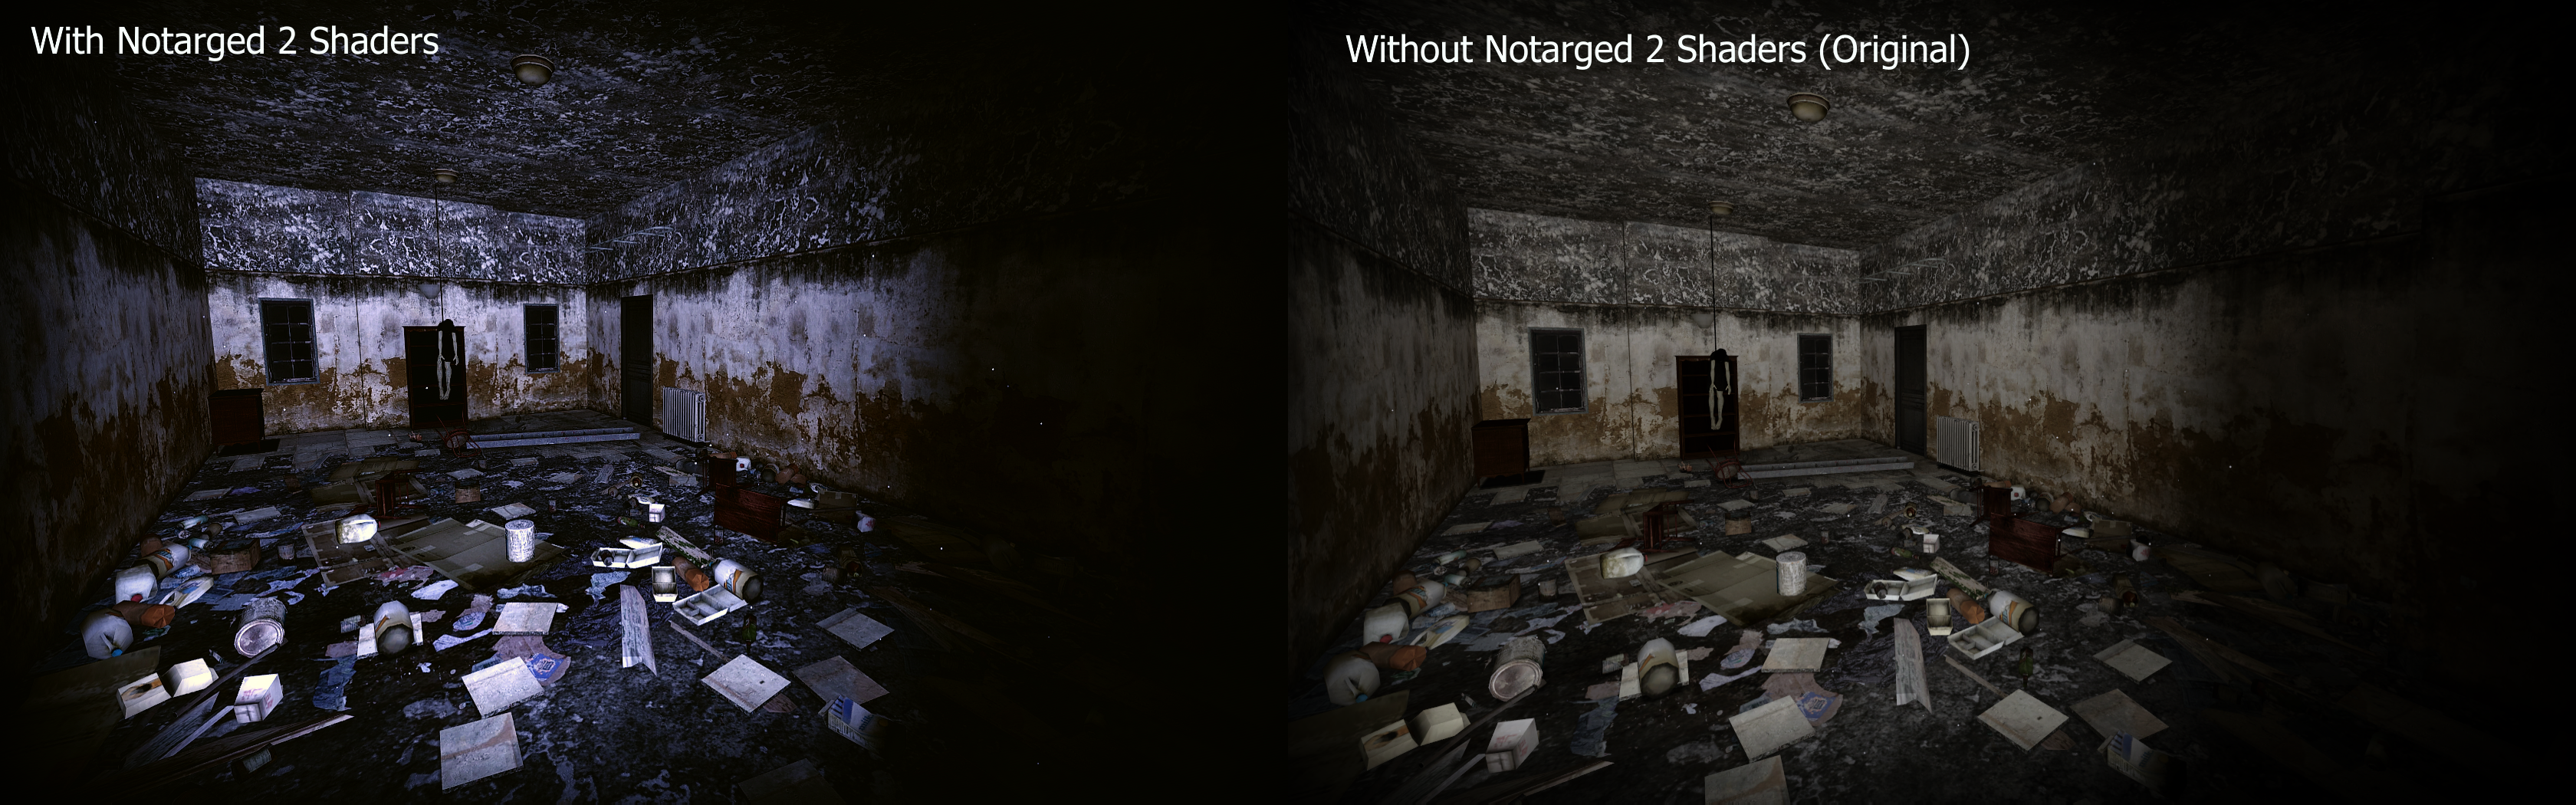 nightmare-house-2-remastered-image-notarged-2-mod-for-half-life-2-moddb